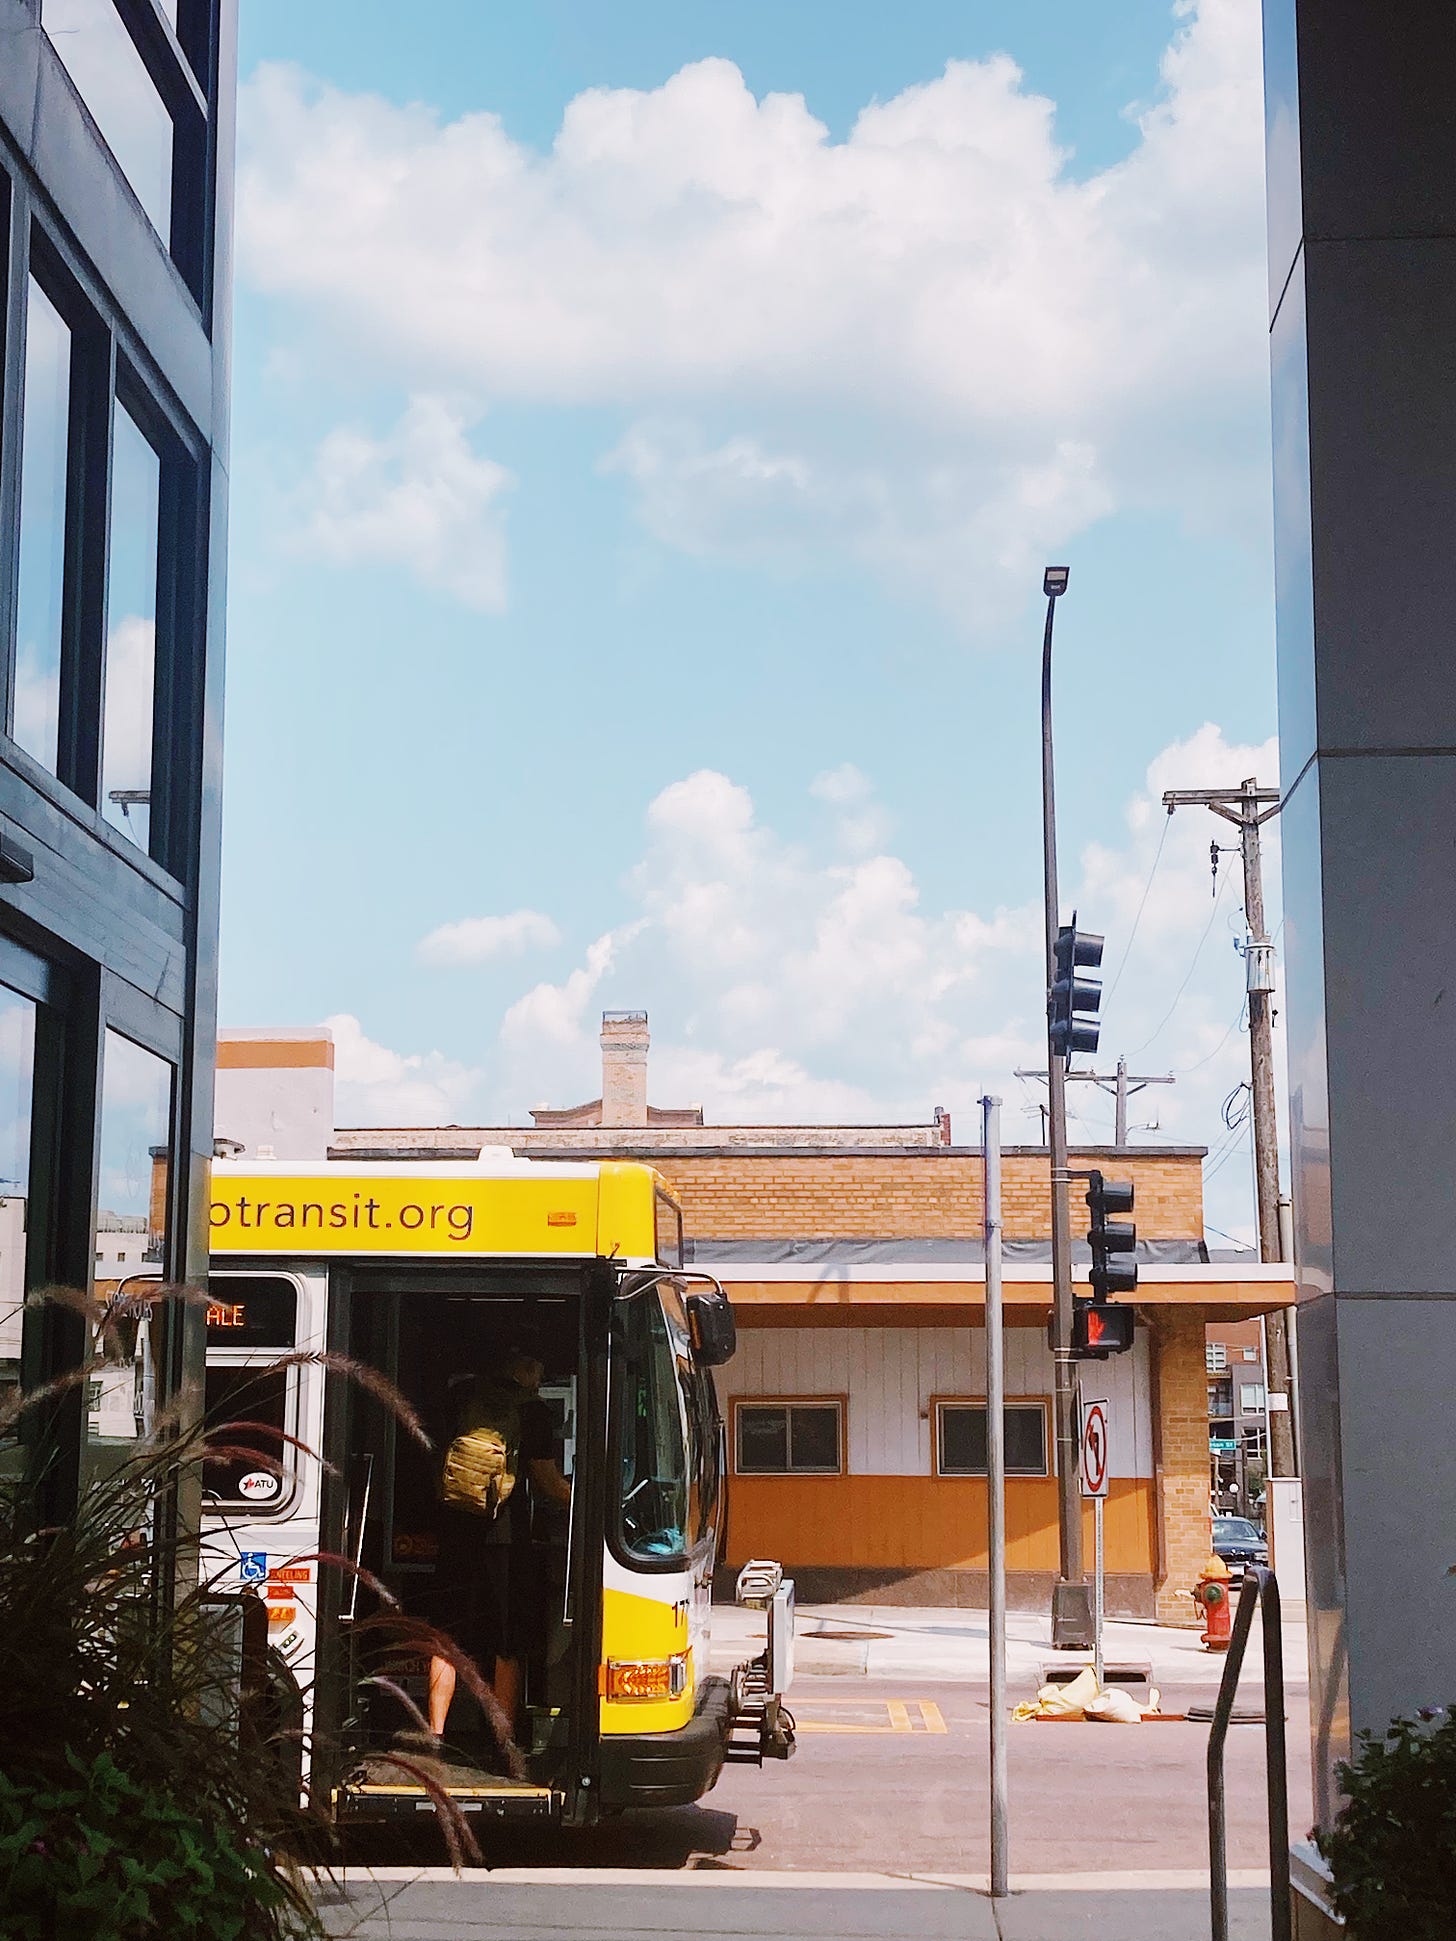 a passenger climbs onto a metro transit bus in front of a brick building and blue sky with white clouds